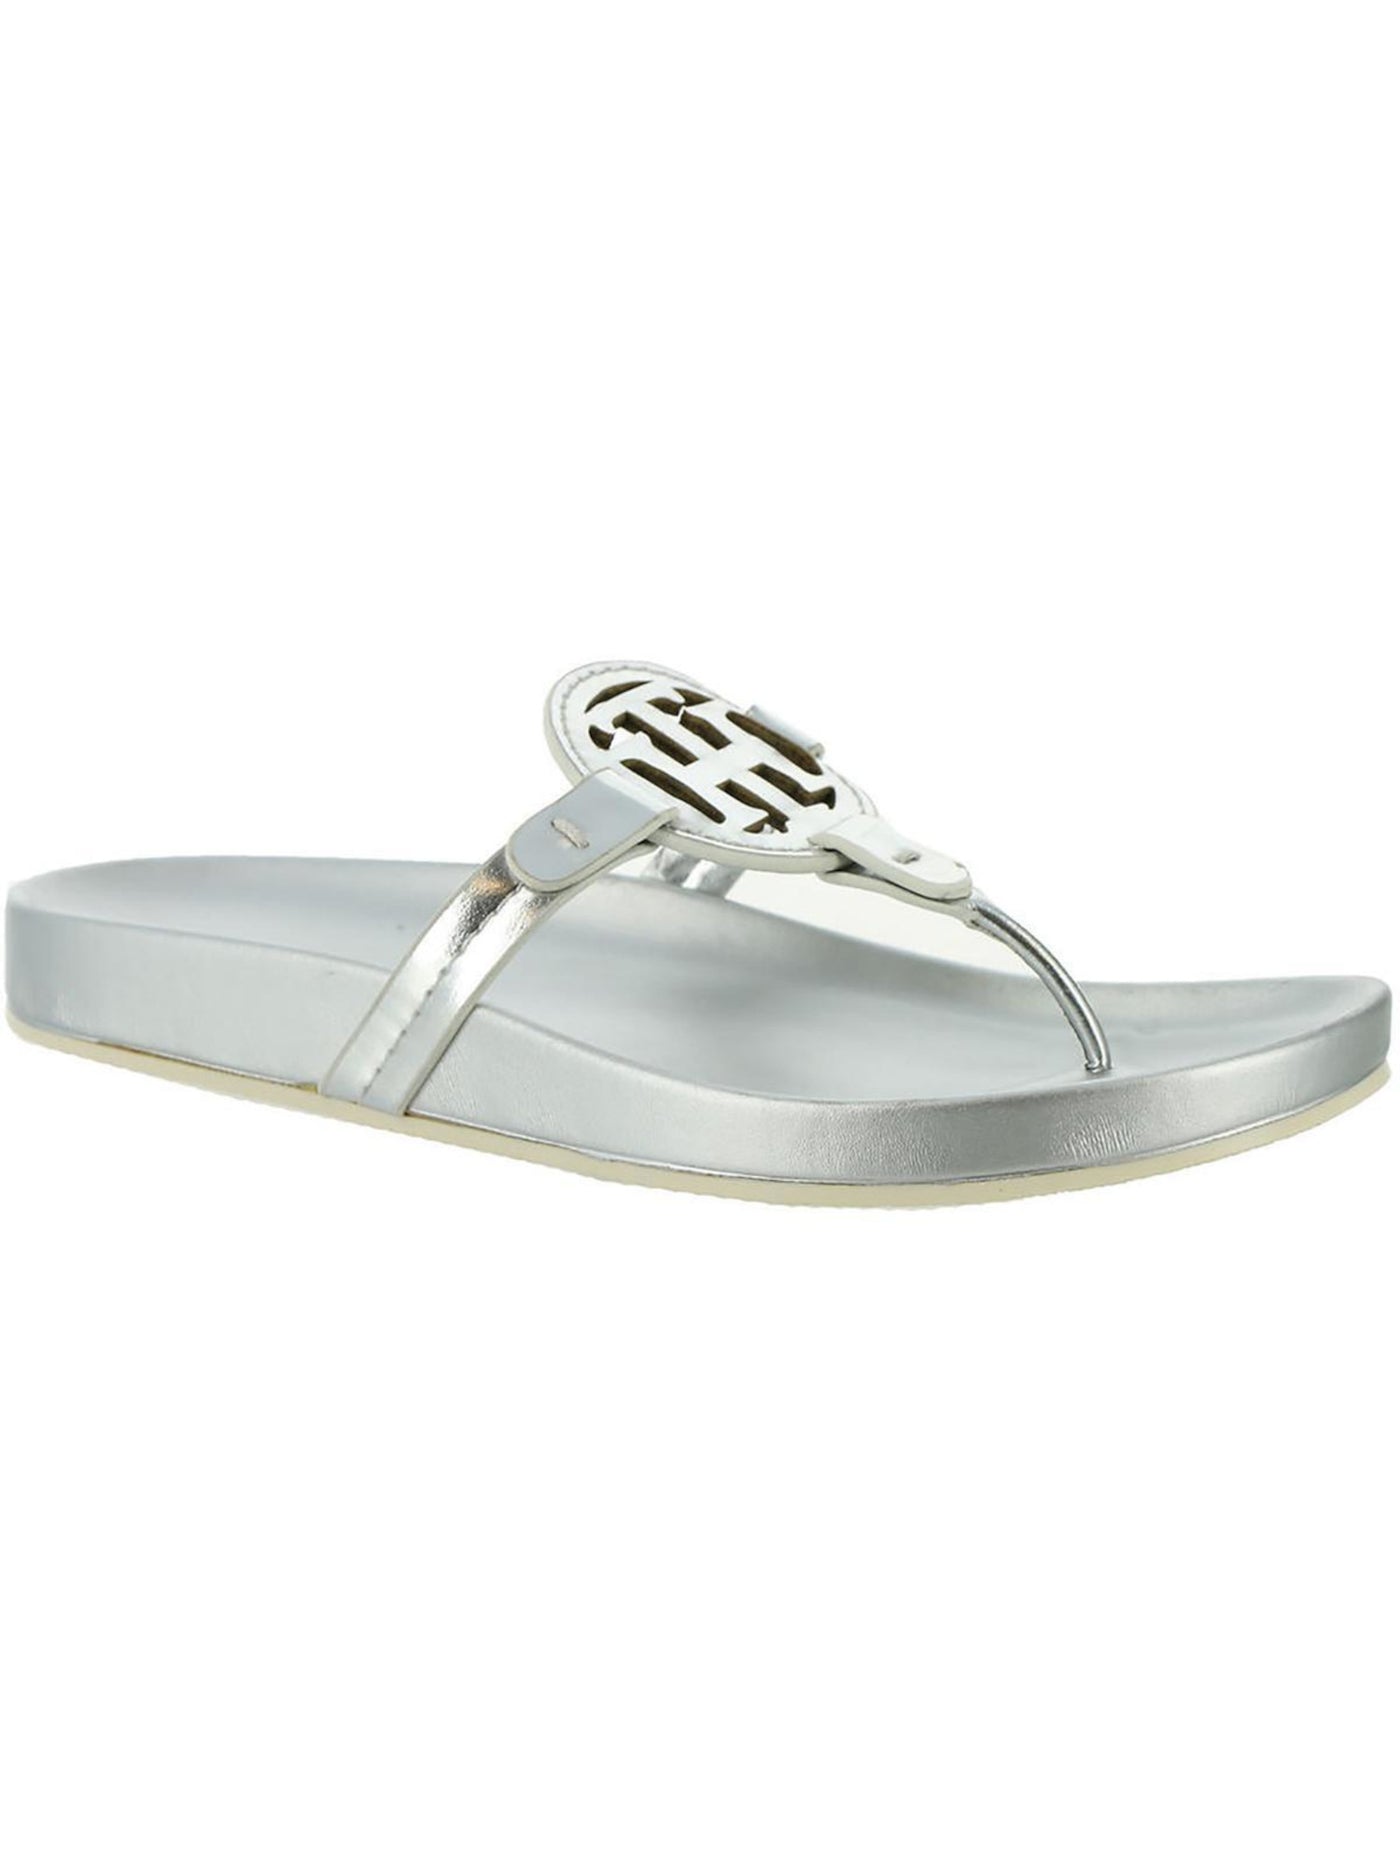 TOMMY HILFIGER Womens Silver Cut Out Comfort Relina Open Toe Slip On Thong Sandals Shoes 8 M